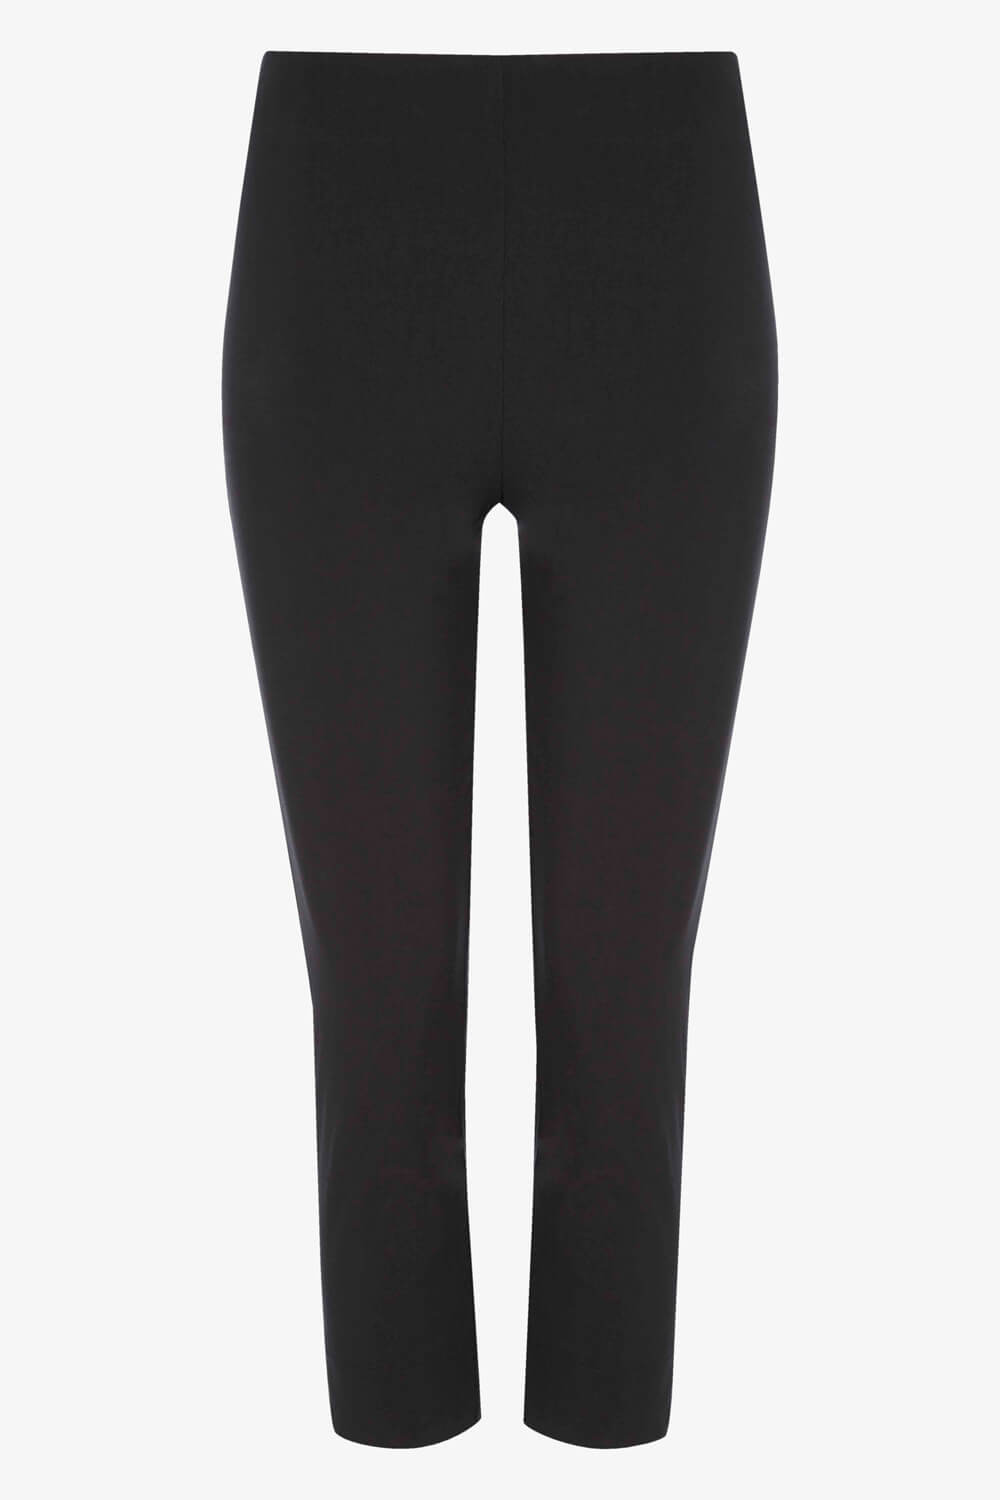 Black Petite Cropped Stretch Trouser, Image 5 of 5